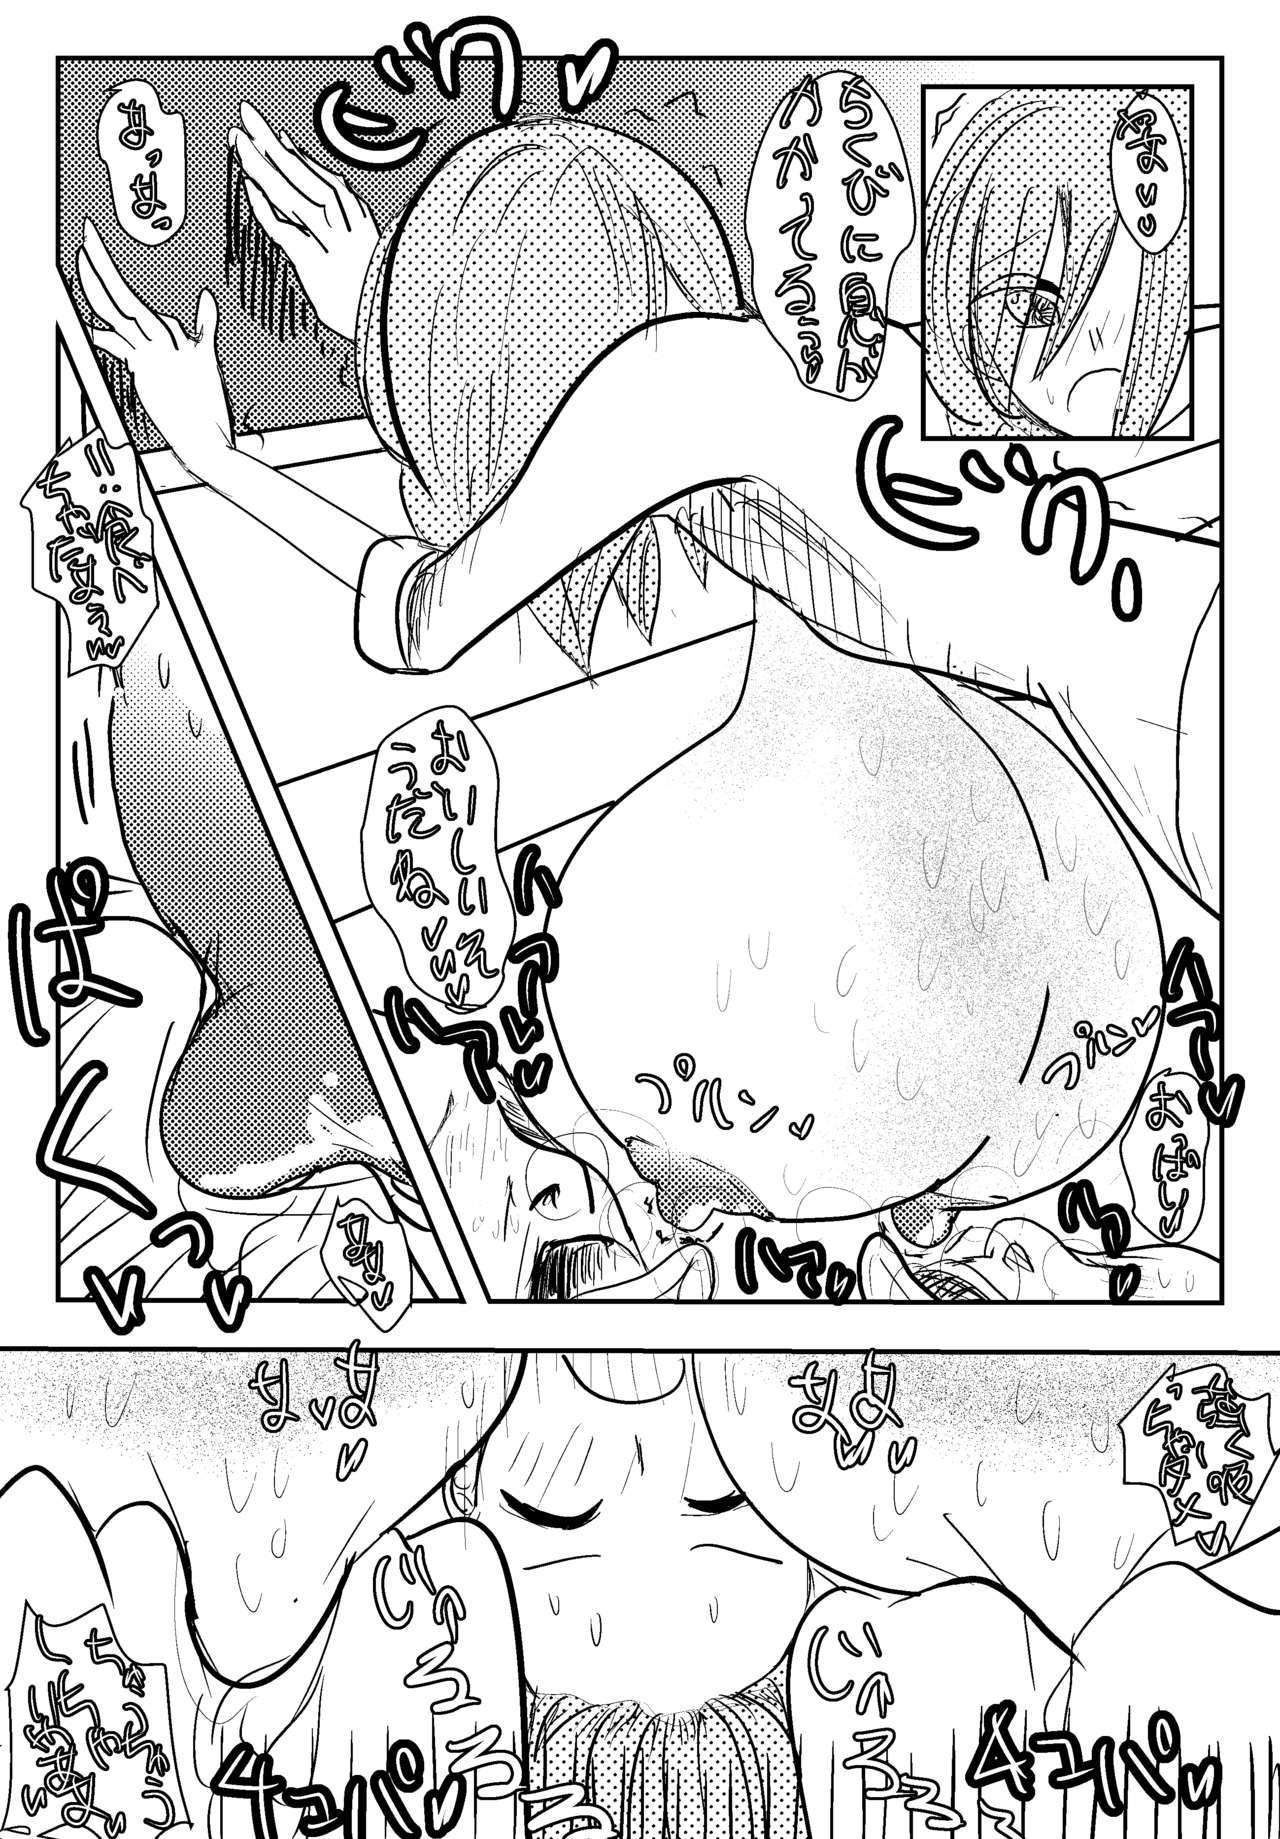 She 両乳首吸われて喘いじゃう爆乳OL Cumload - Page 6